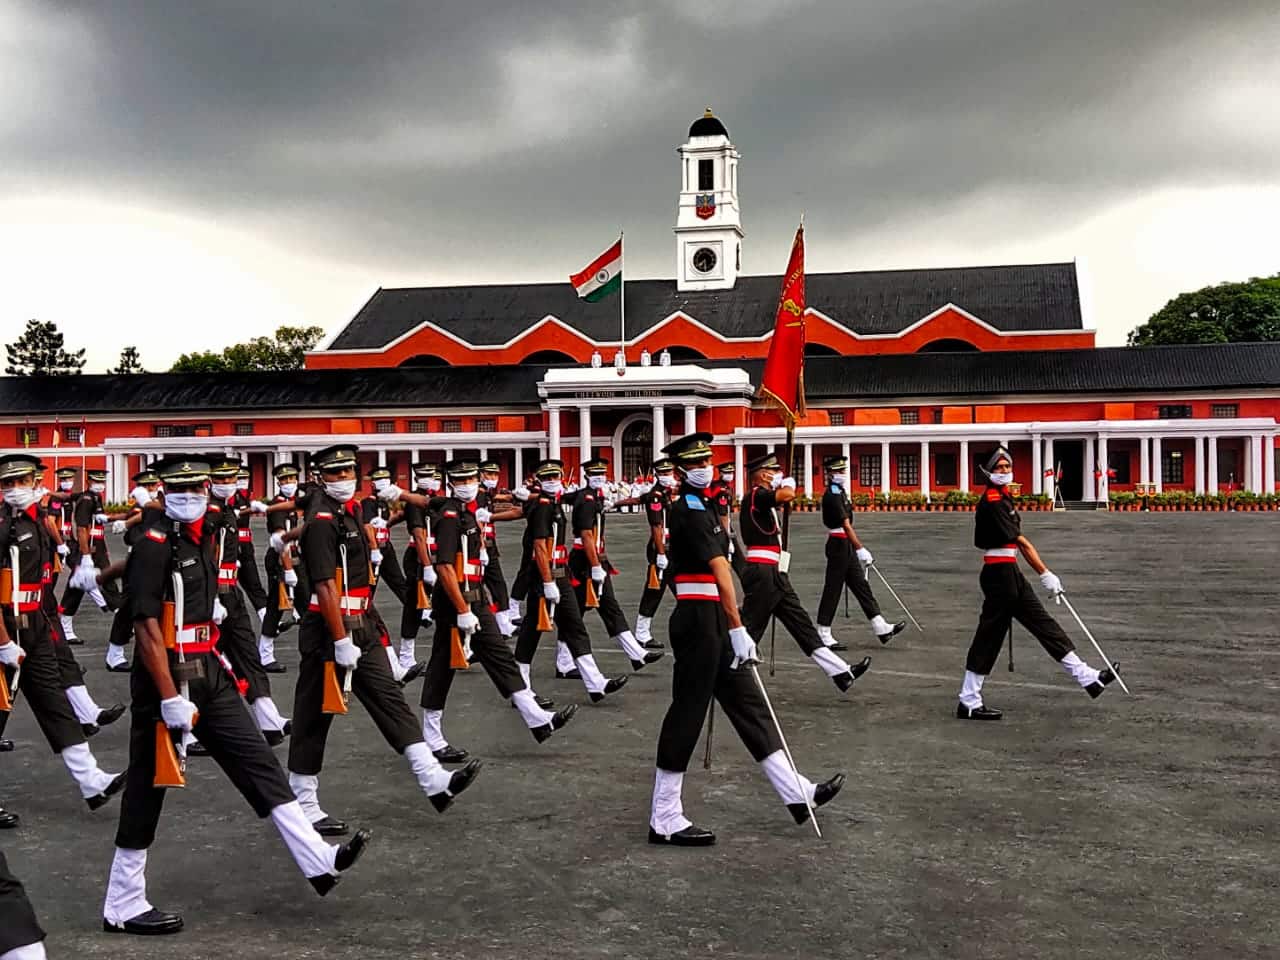 In pics: IMA Passing Out Parade held amid COVID-19 threat in Dehradun |  News | Zee News